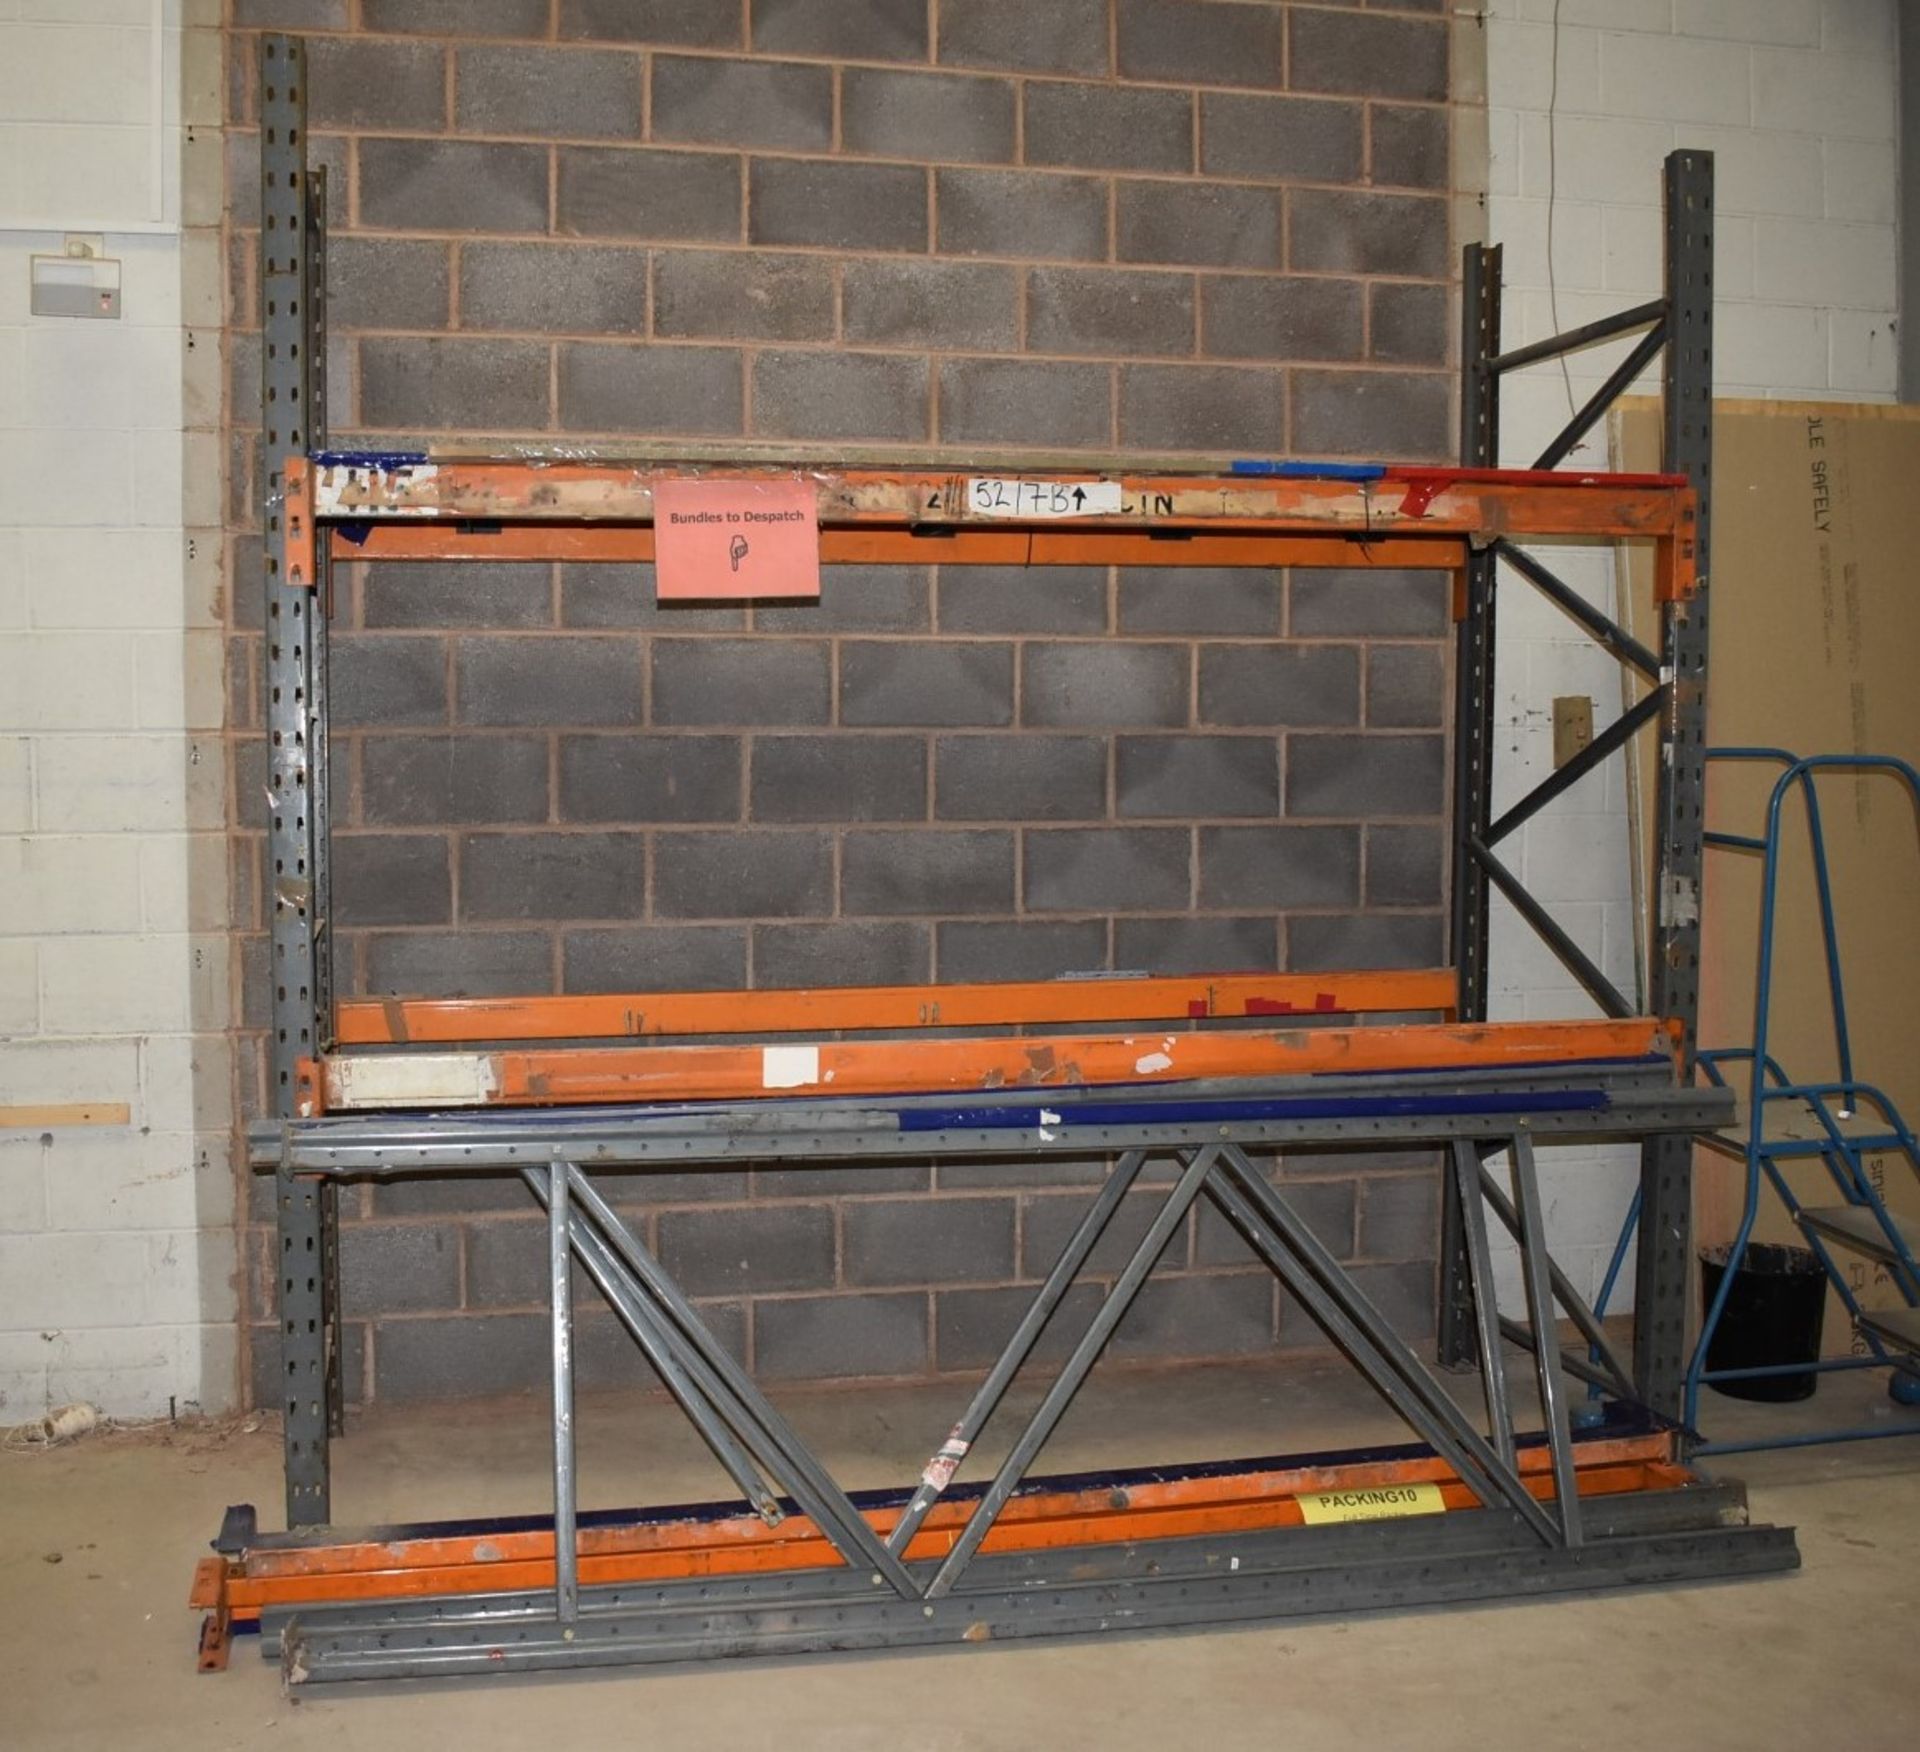 3 x Bays of Warehouse Racking - Lot Includes 4 x Uprights and 8 x Crossbeams - Dimensions: Approx